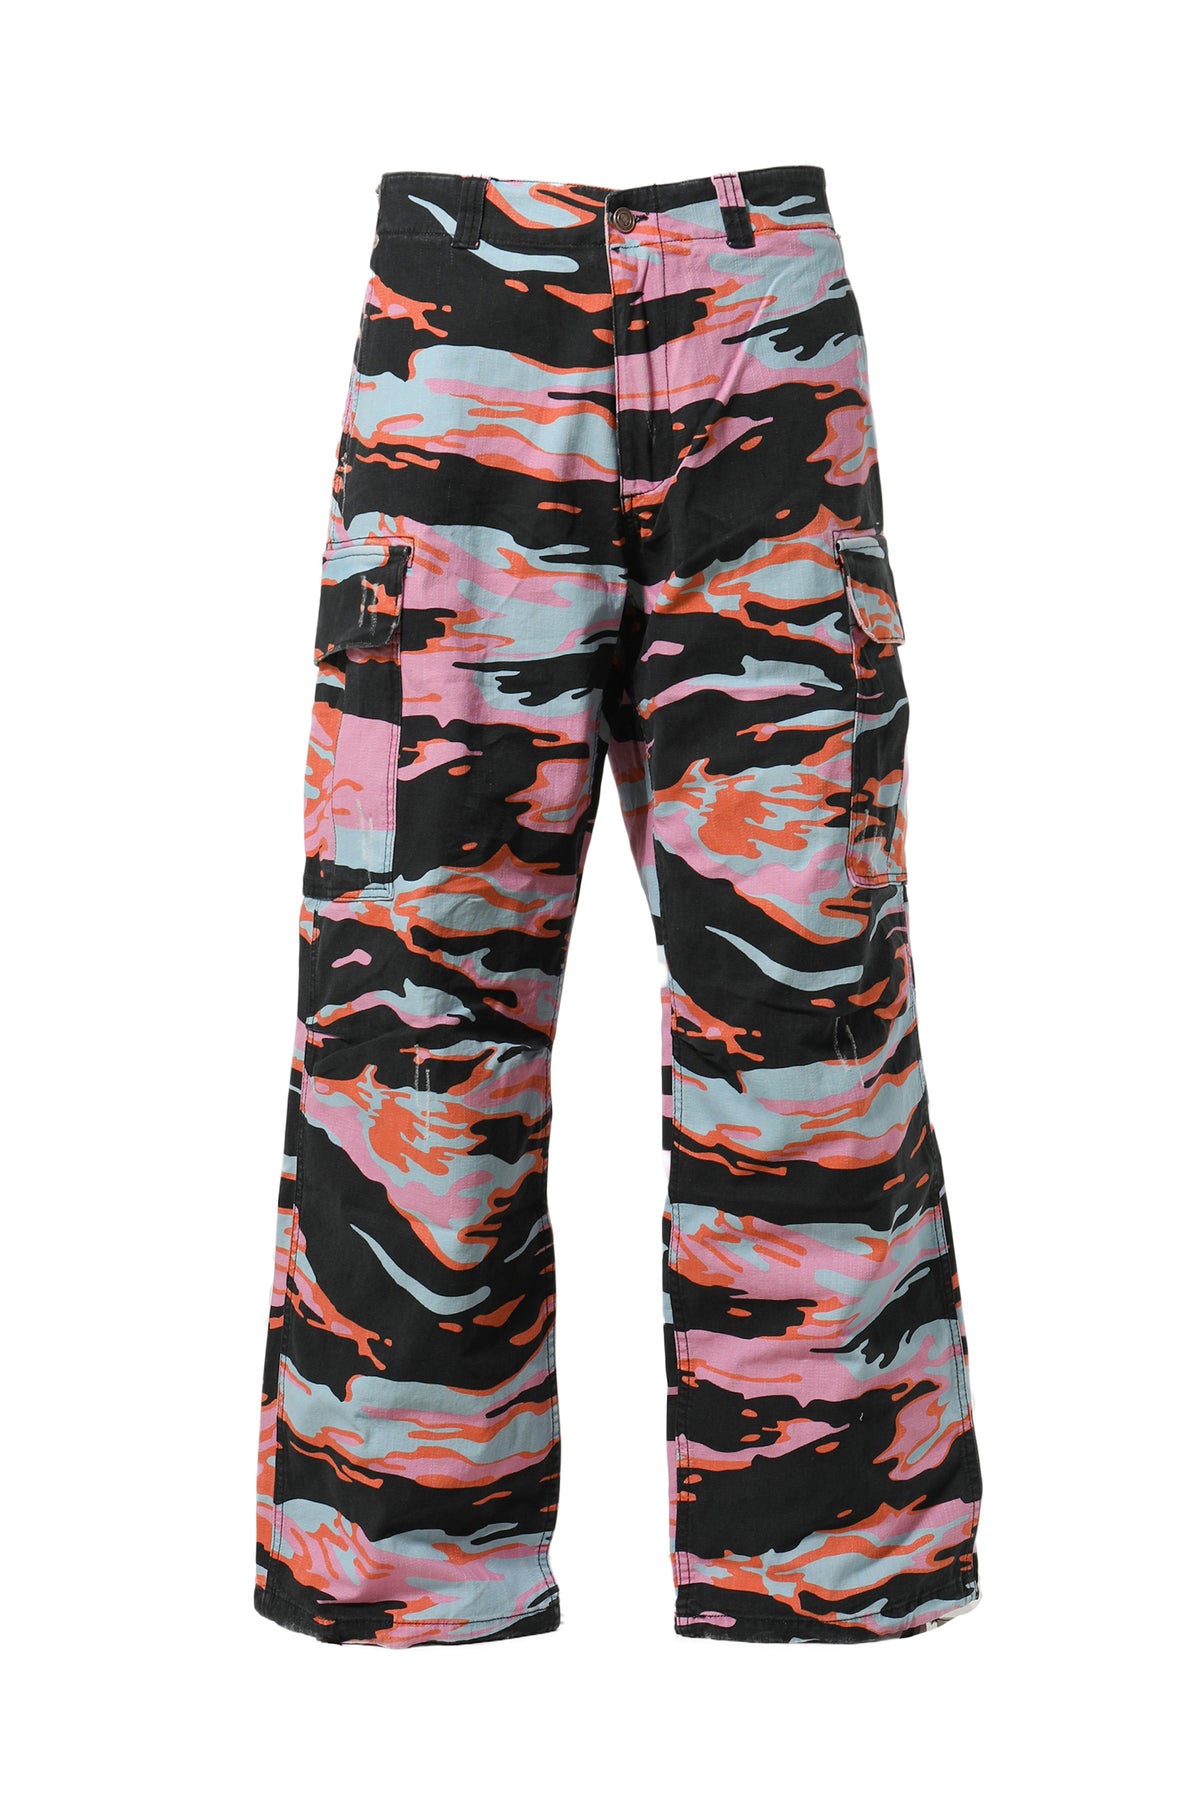 ERL PRINTED CARGO PANTS WOVEN / ERL PINK RAVE CAMO